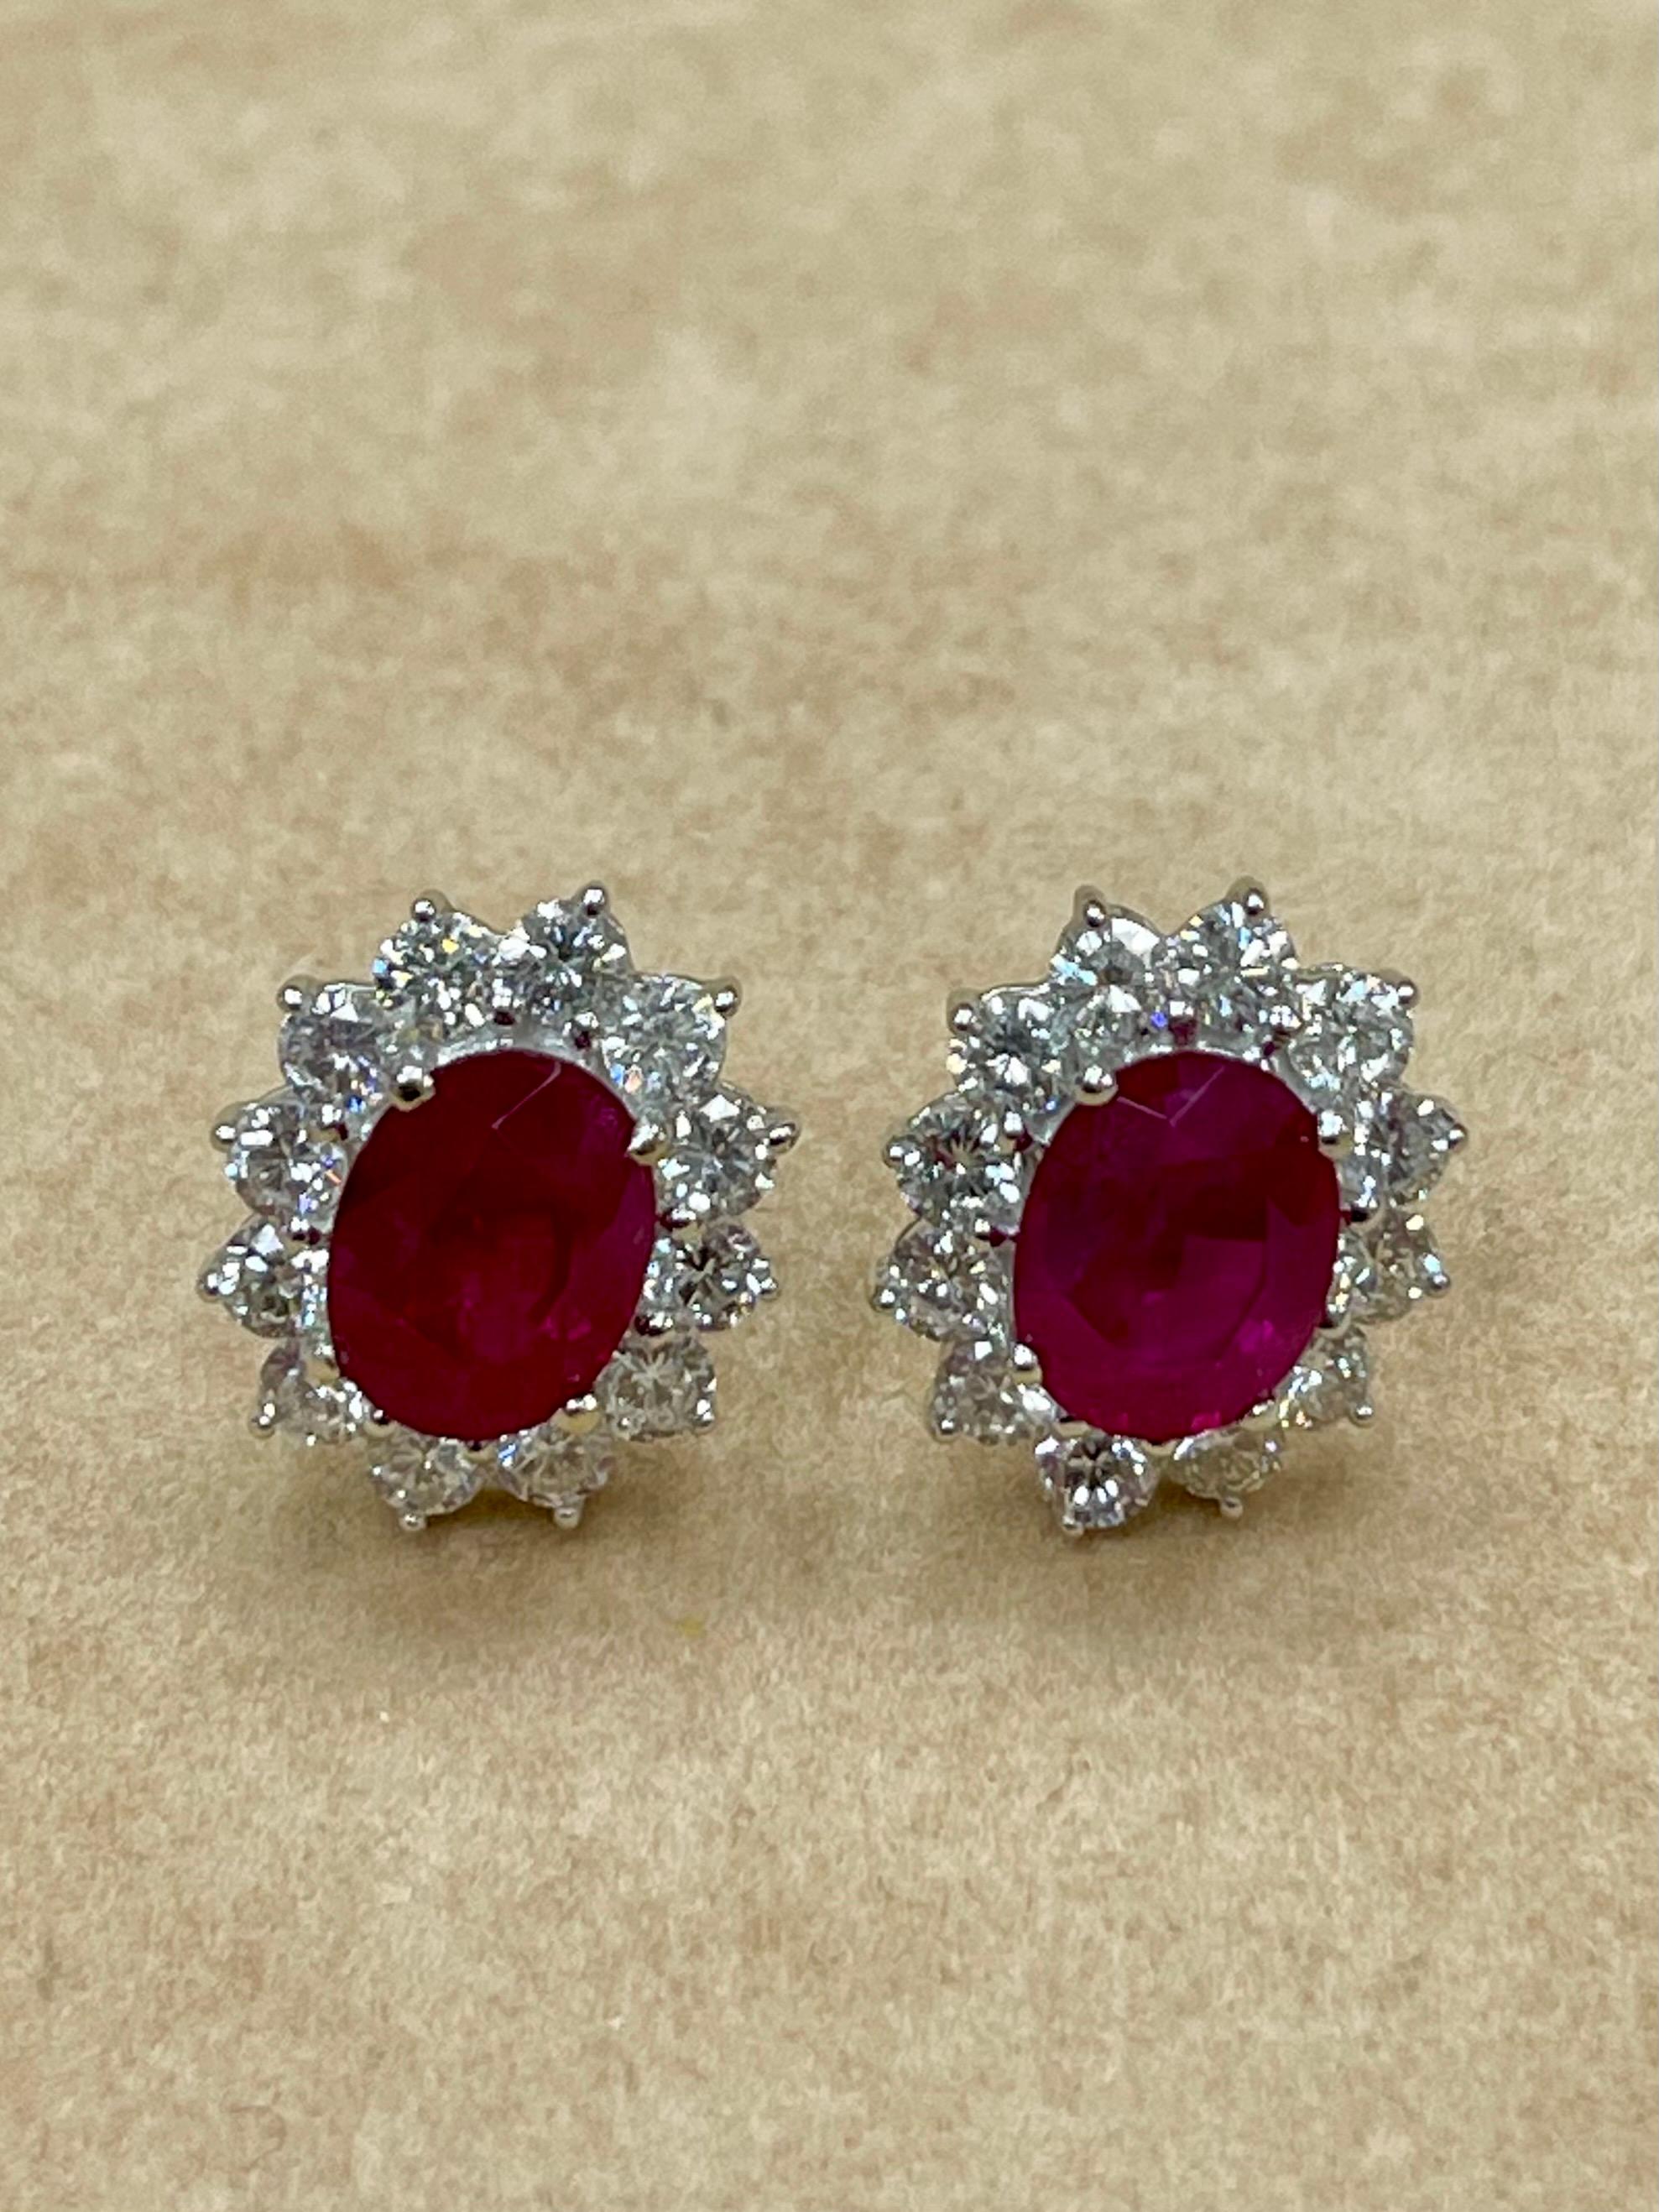 Vivid Red Ruby 4.00 CTW & Diamond Stud Earrings, Close to Pigeon Blood Red 6